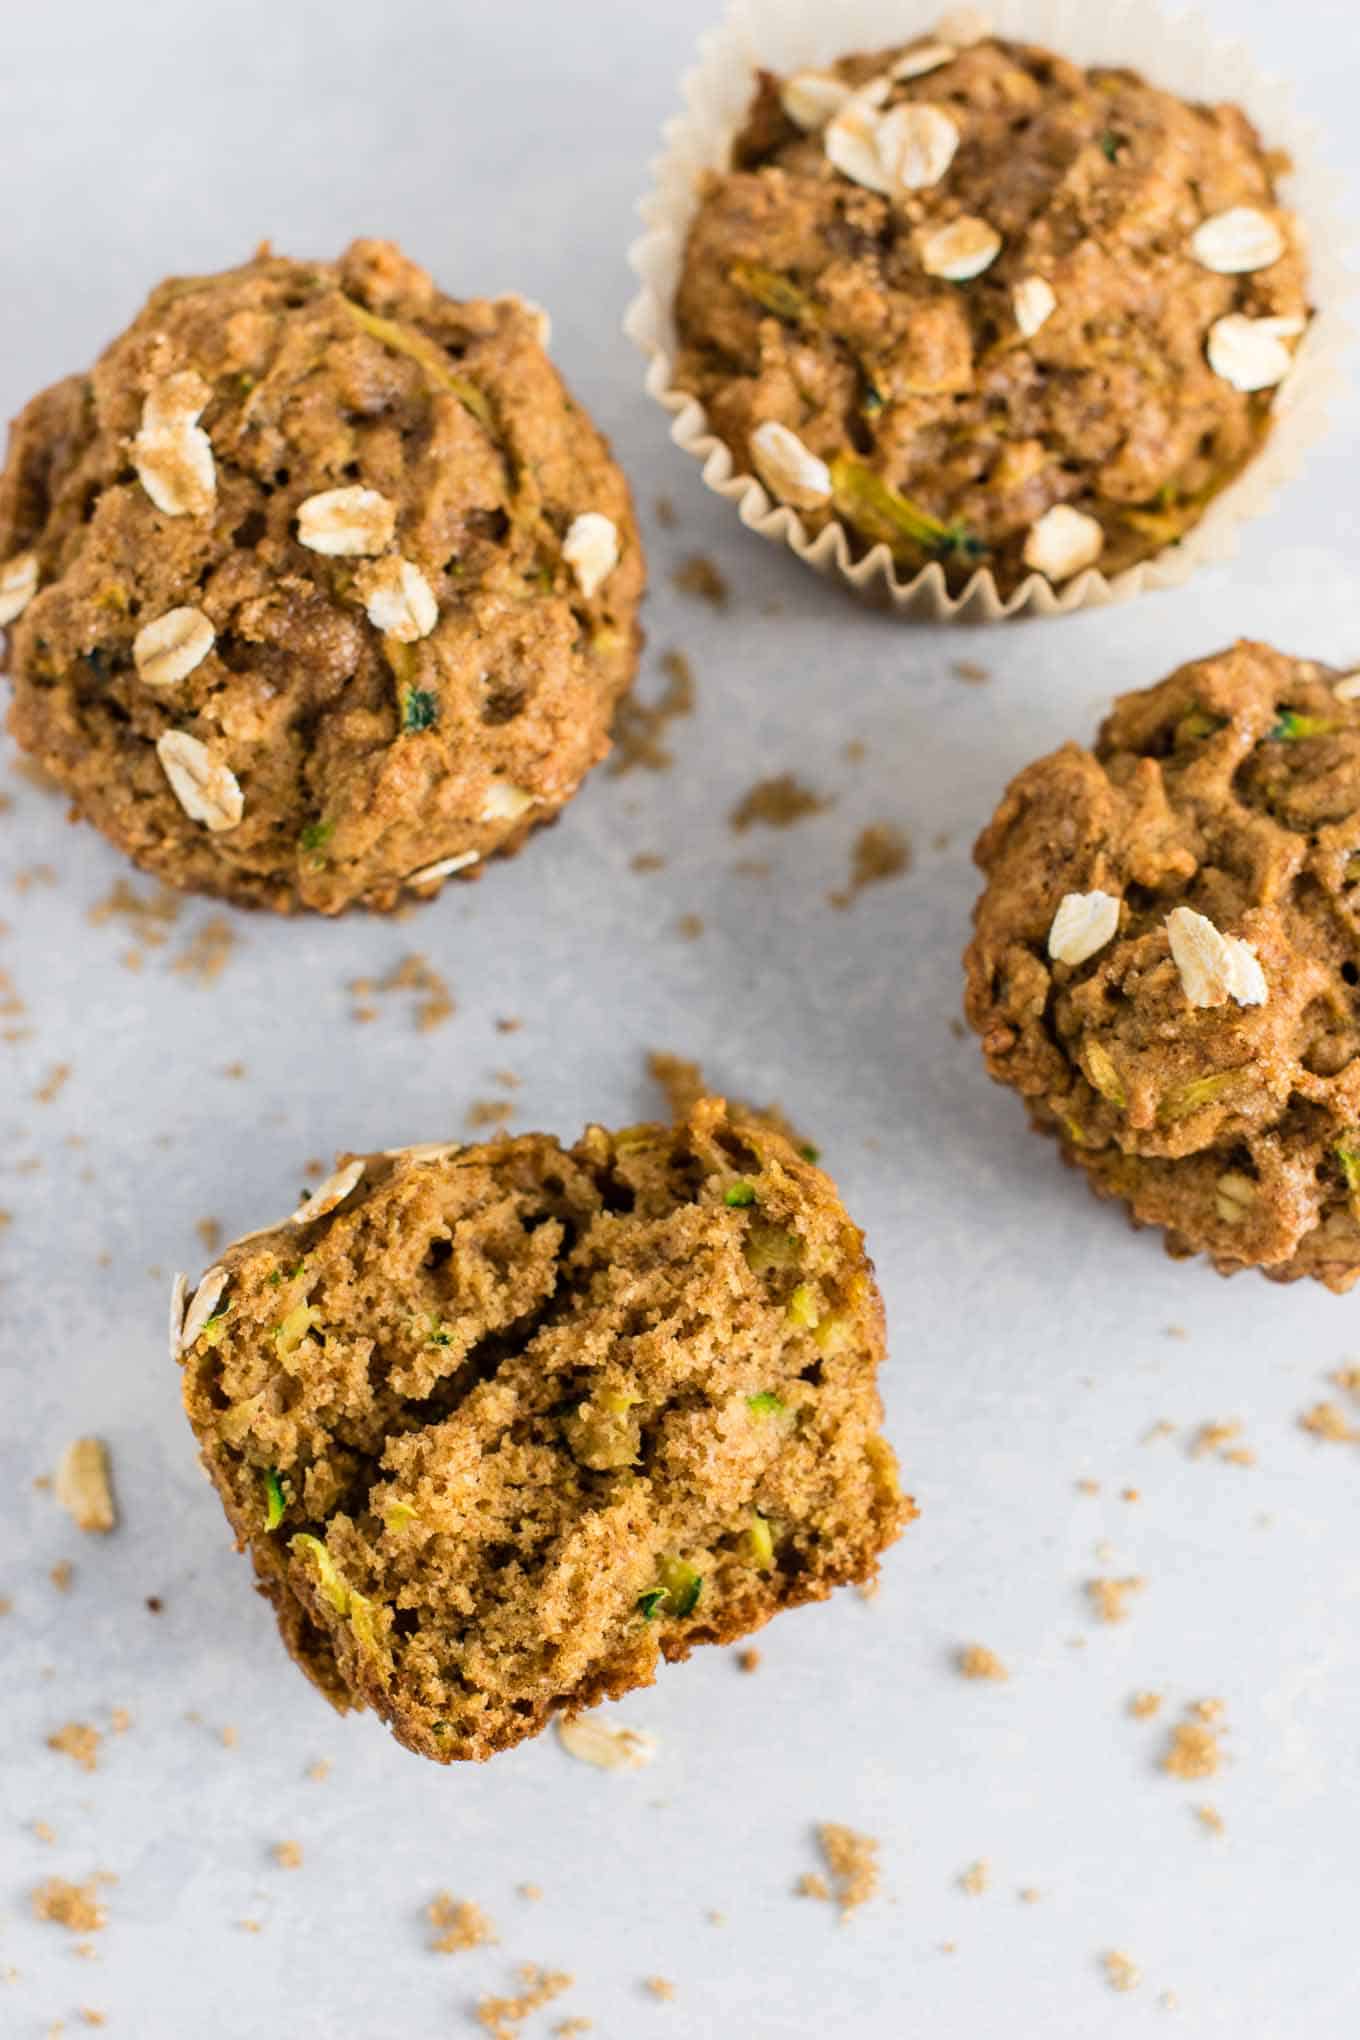 Brown Sugar Healthy Zucchini Bread Muffins recipe - melt in your mouth good! Perfect for using up all that zucchini! #zucchinibreadmuffins #healthy #healthymuffins #breakfast #vegetarian #healthybreakfast